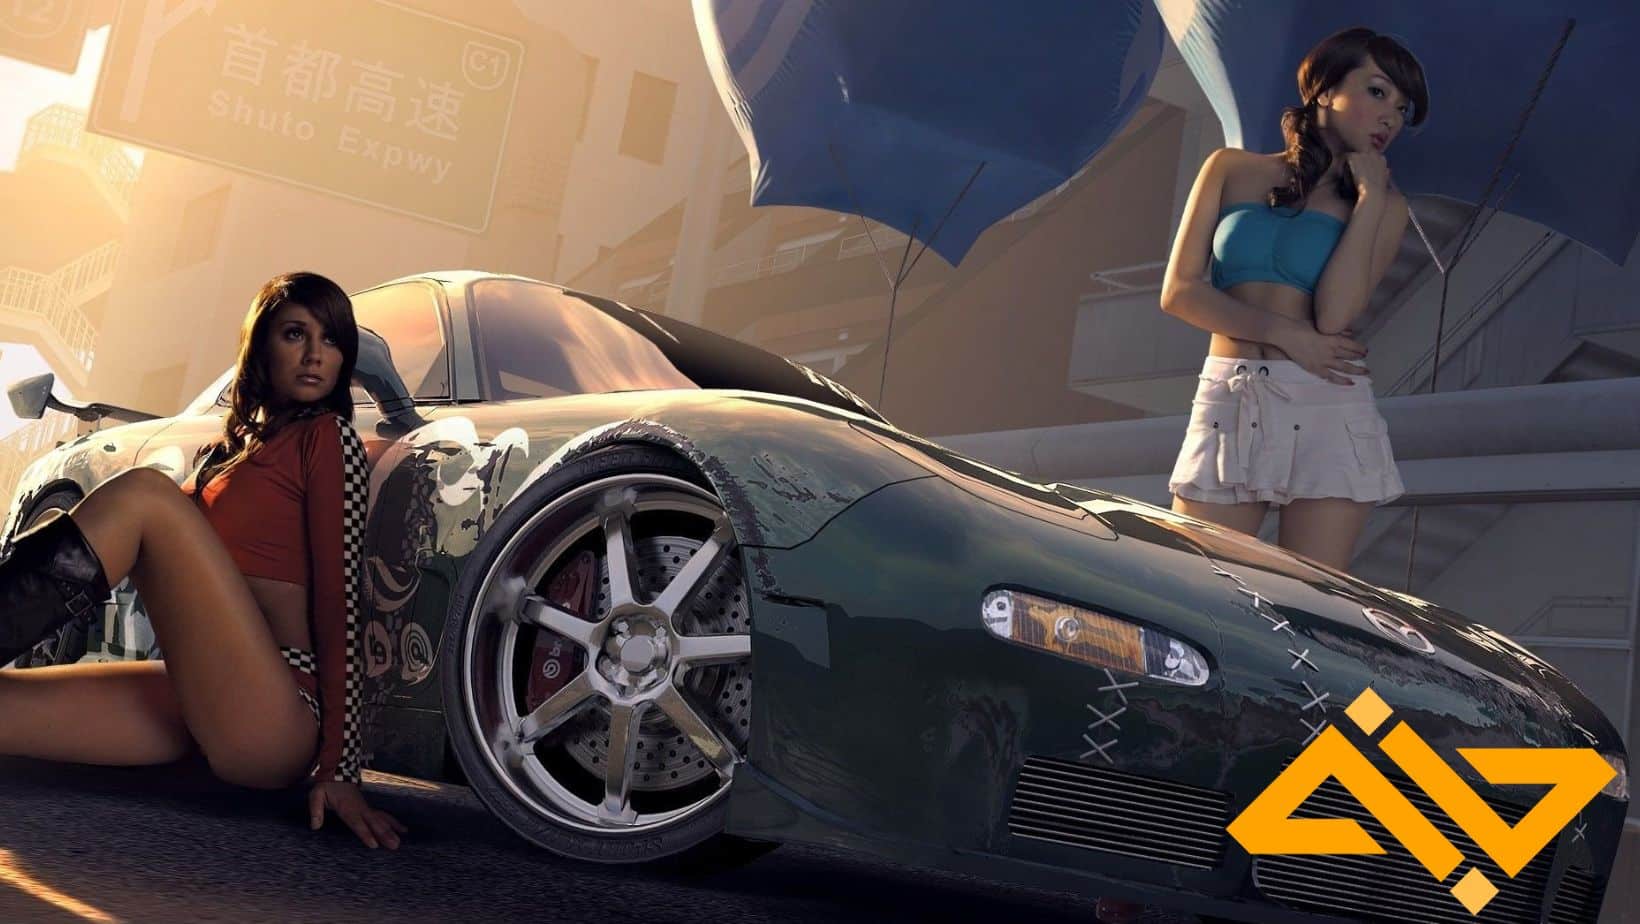 The game introduced realistic damage to cars, which was a good addition for purists